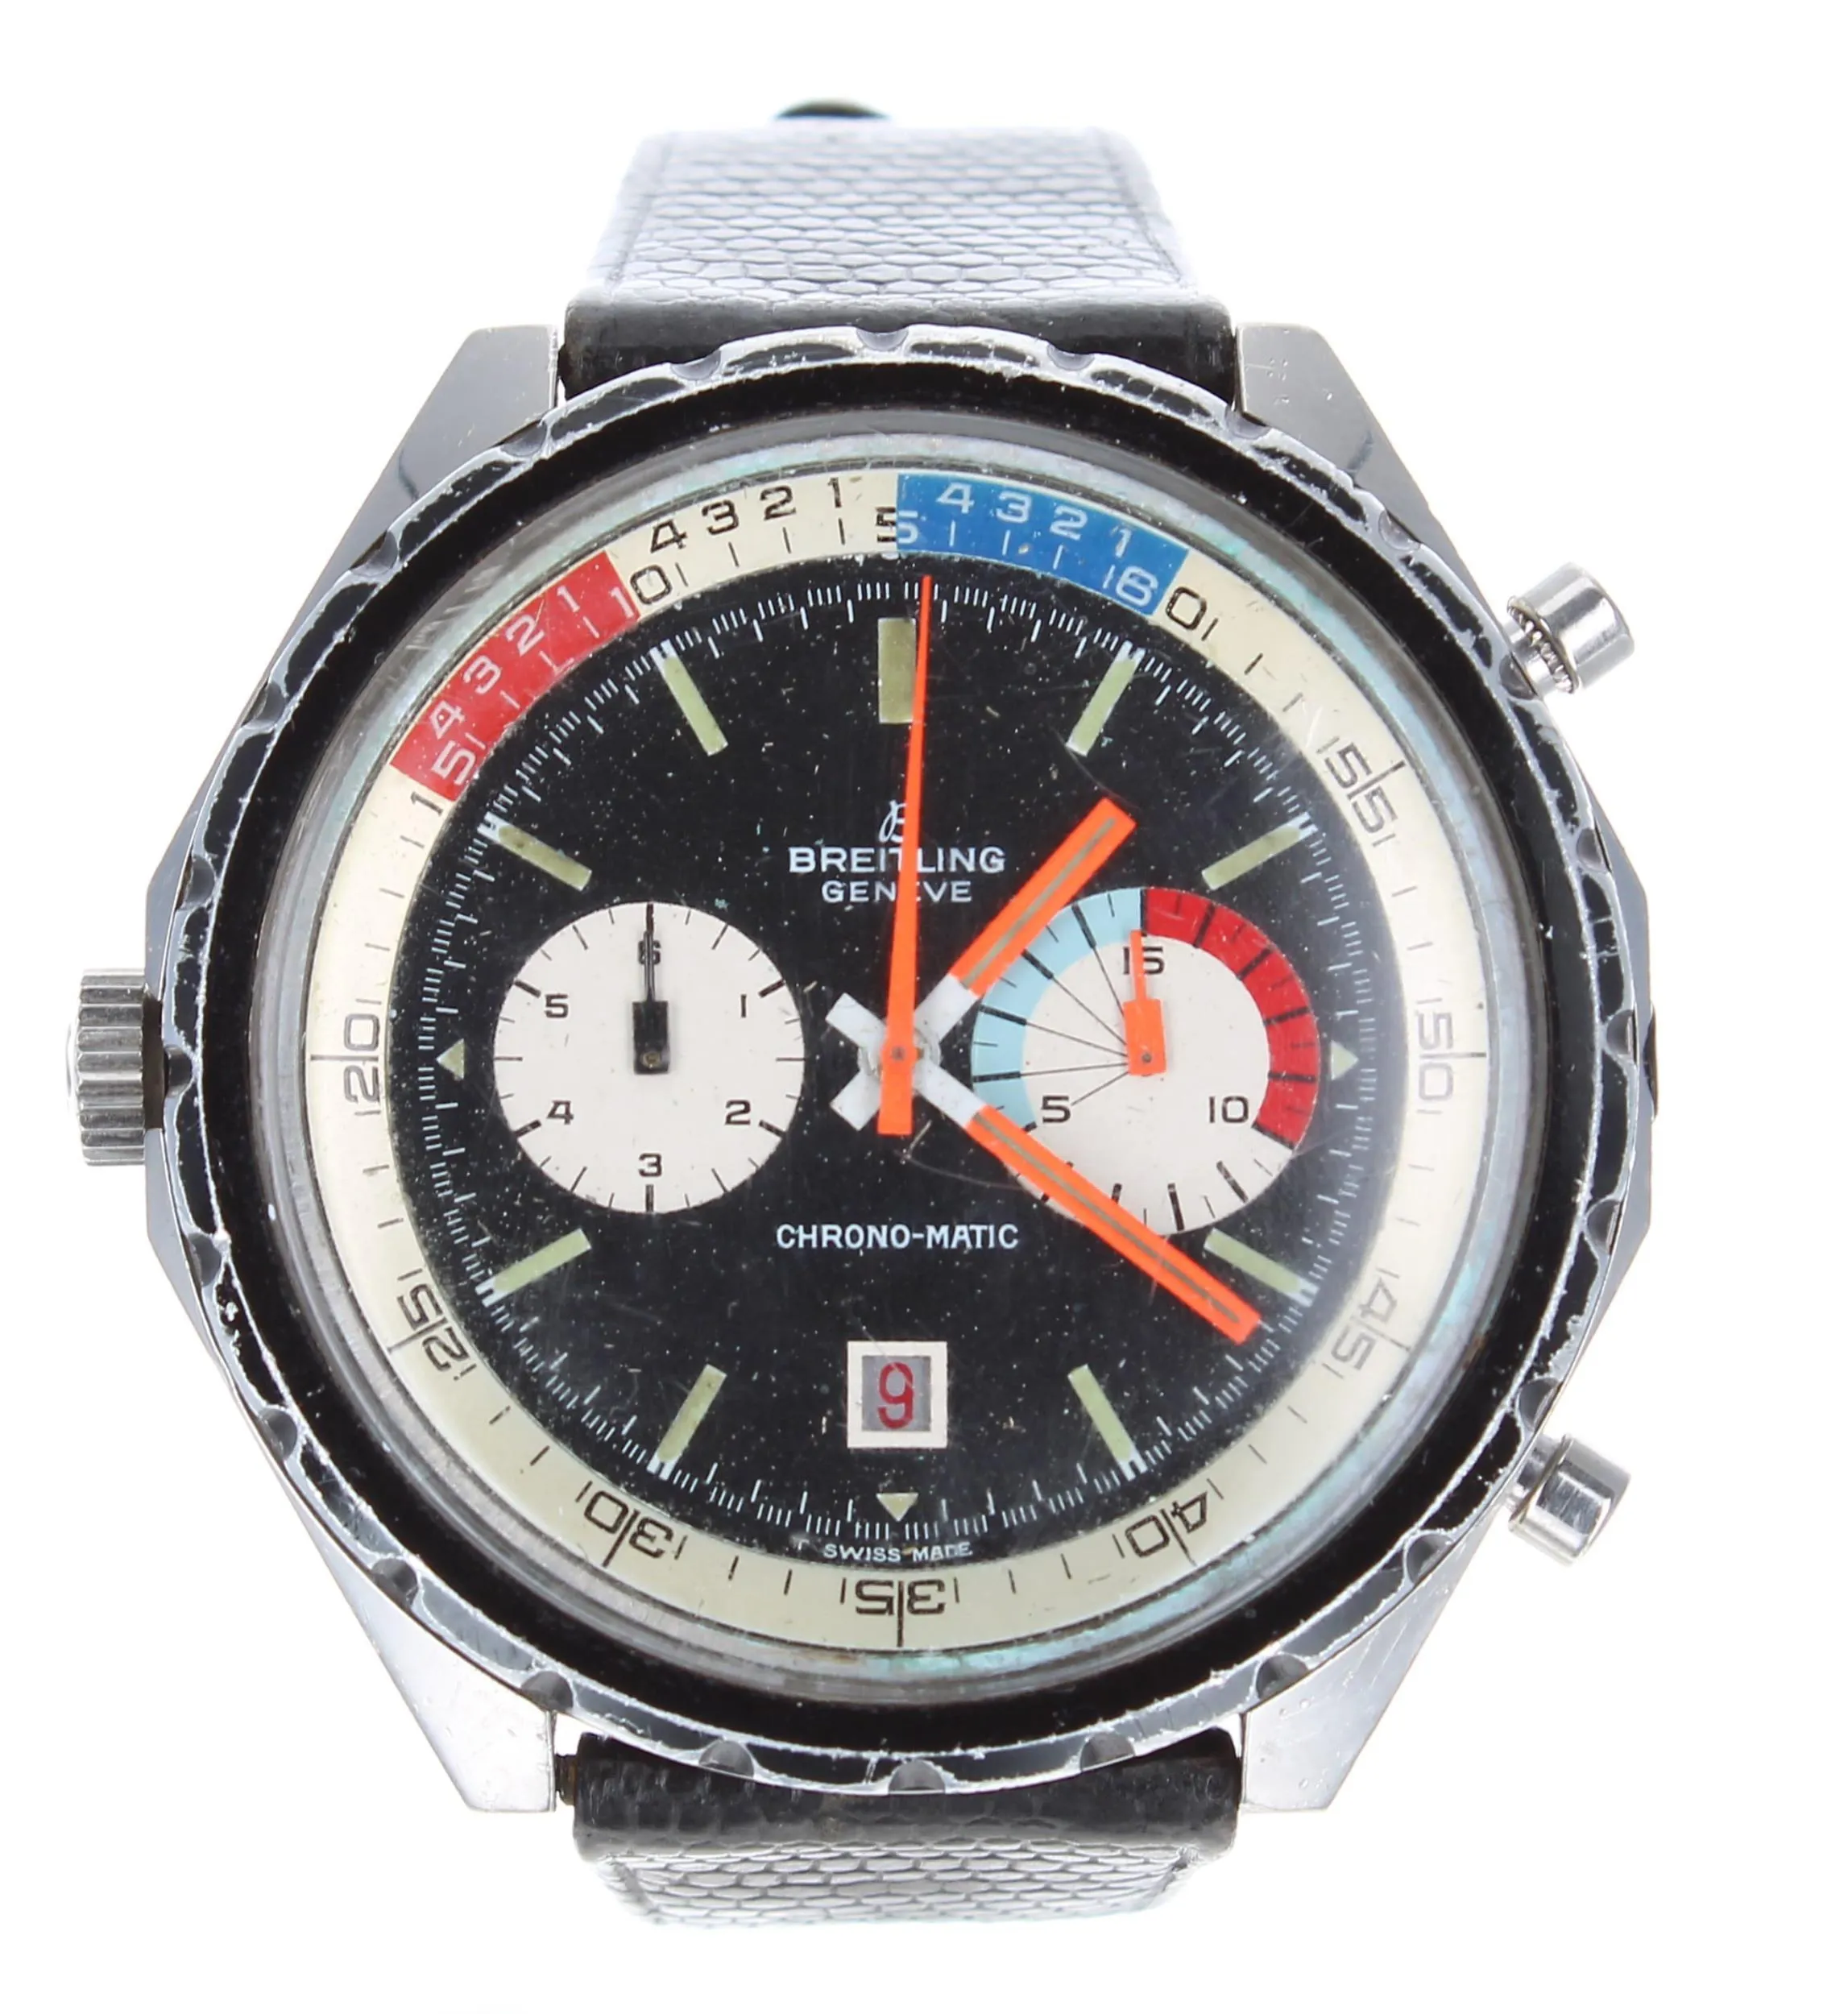 Breitling Chrono-Matic 7651 49mm Stainless steel Black